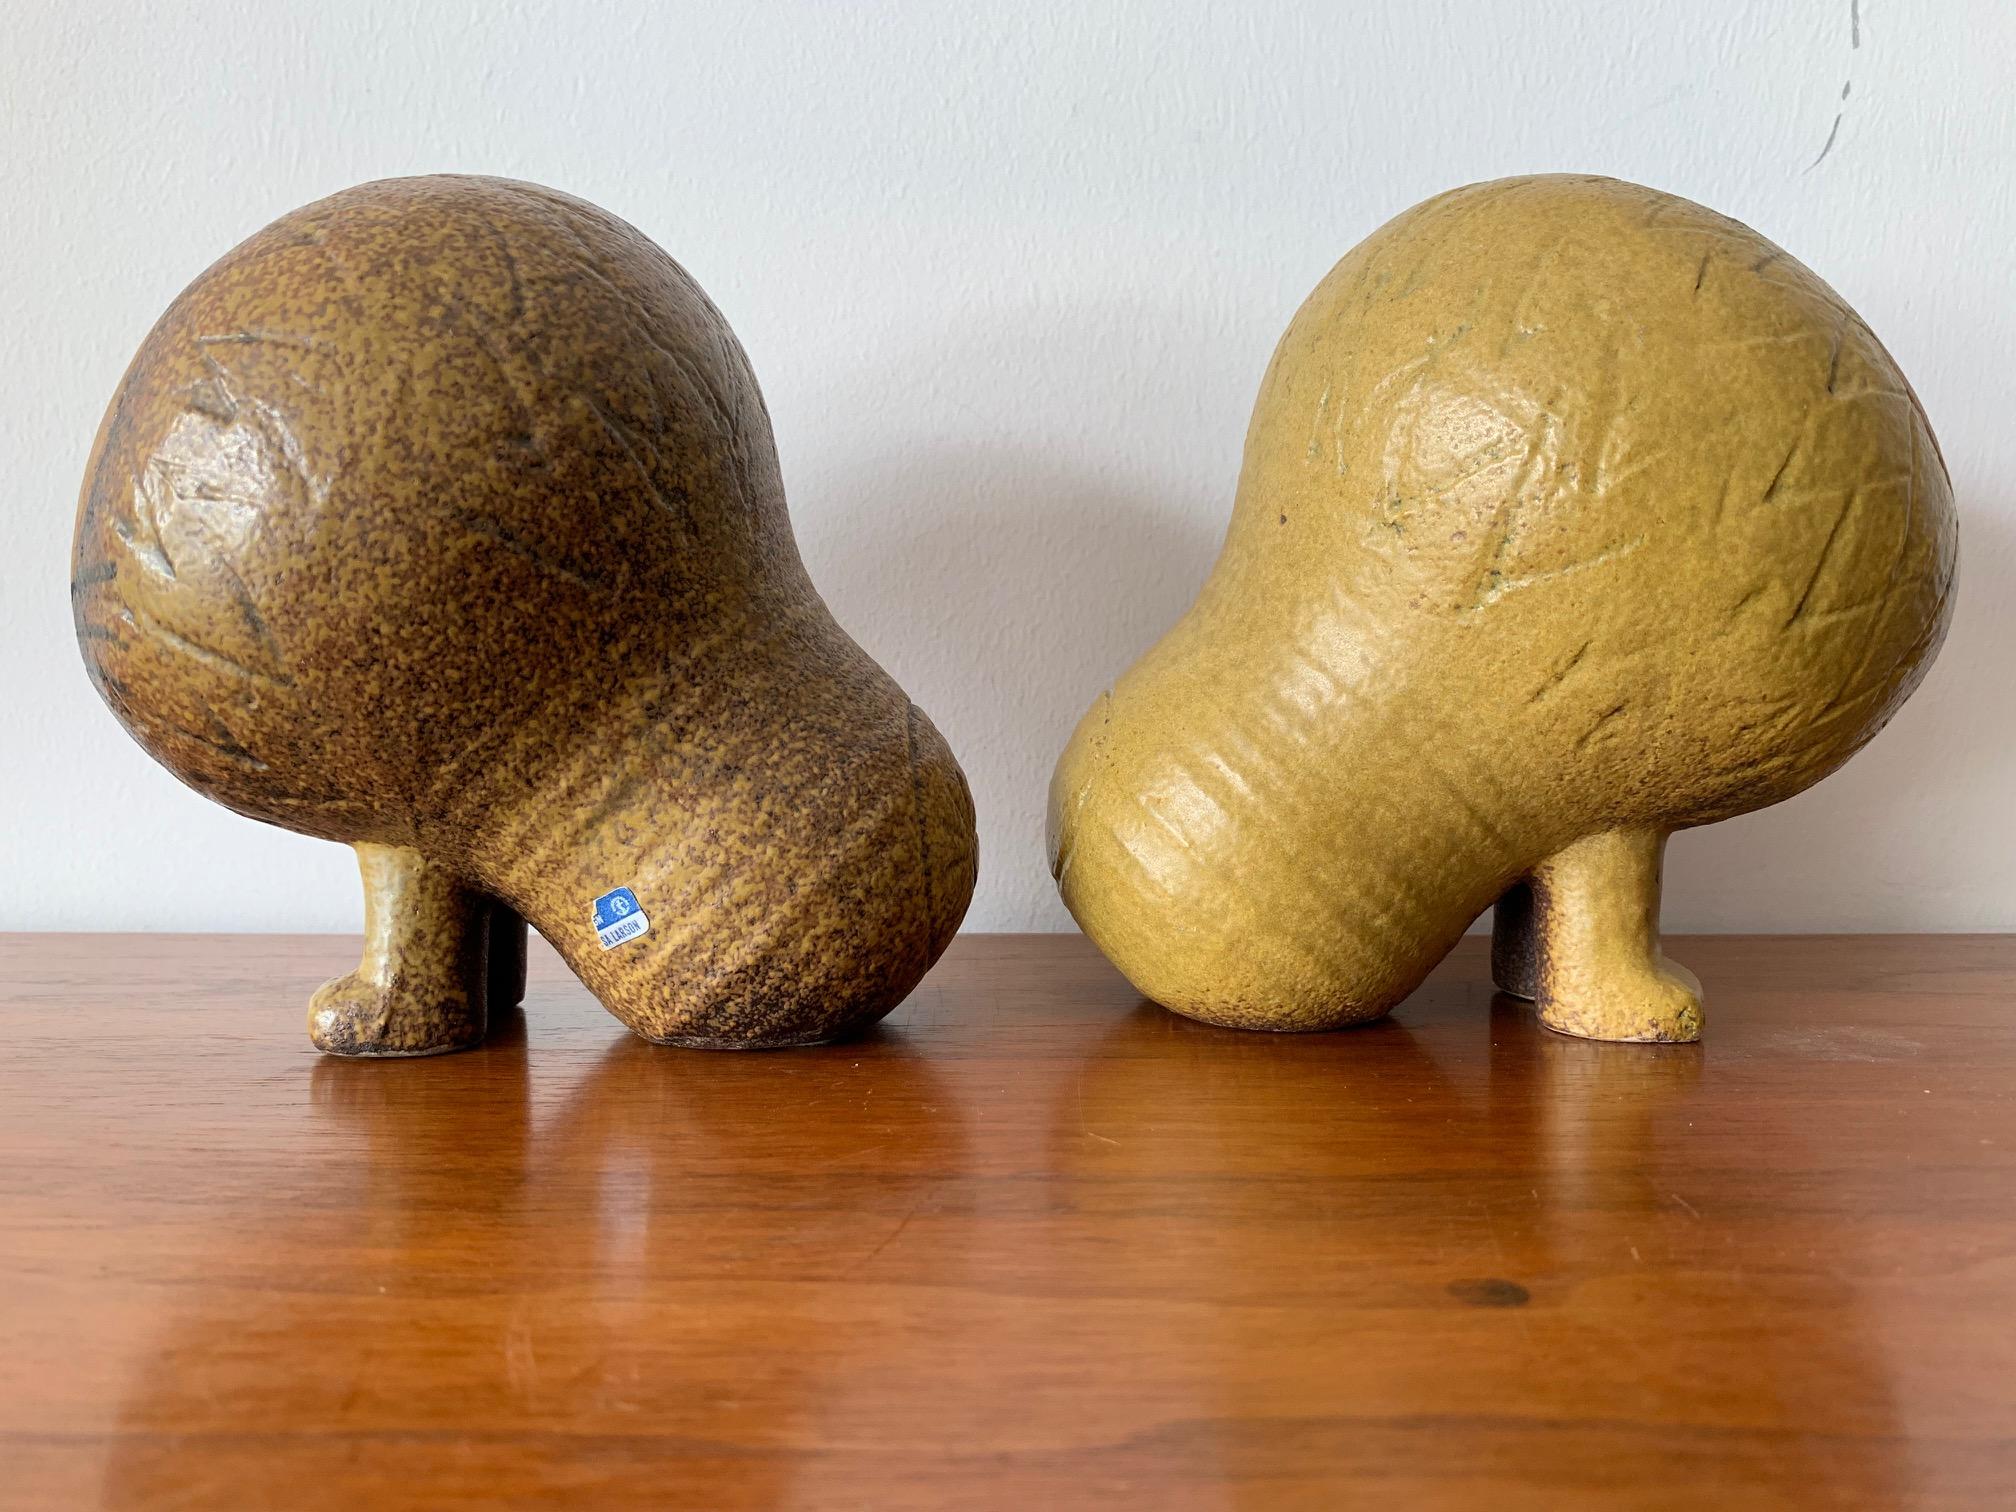 A pair of large lion ceramic sculptures by Lisa Larson for the Africa Series made by Gustavsberg. This size is the largest of the series. Signed at bottom. Whimsical interpretation and beautifully crafted. One has a slightly darker glaze and is a